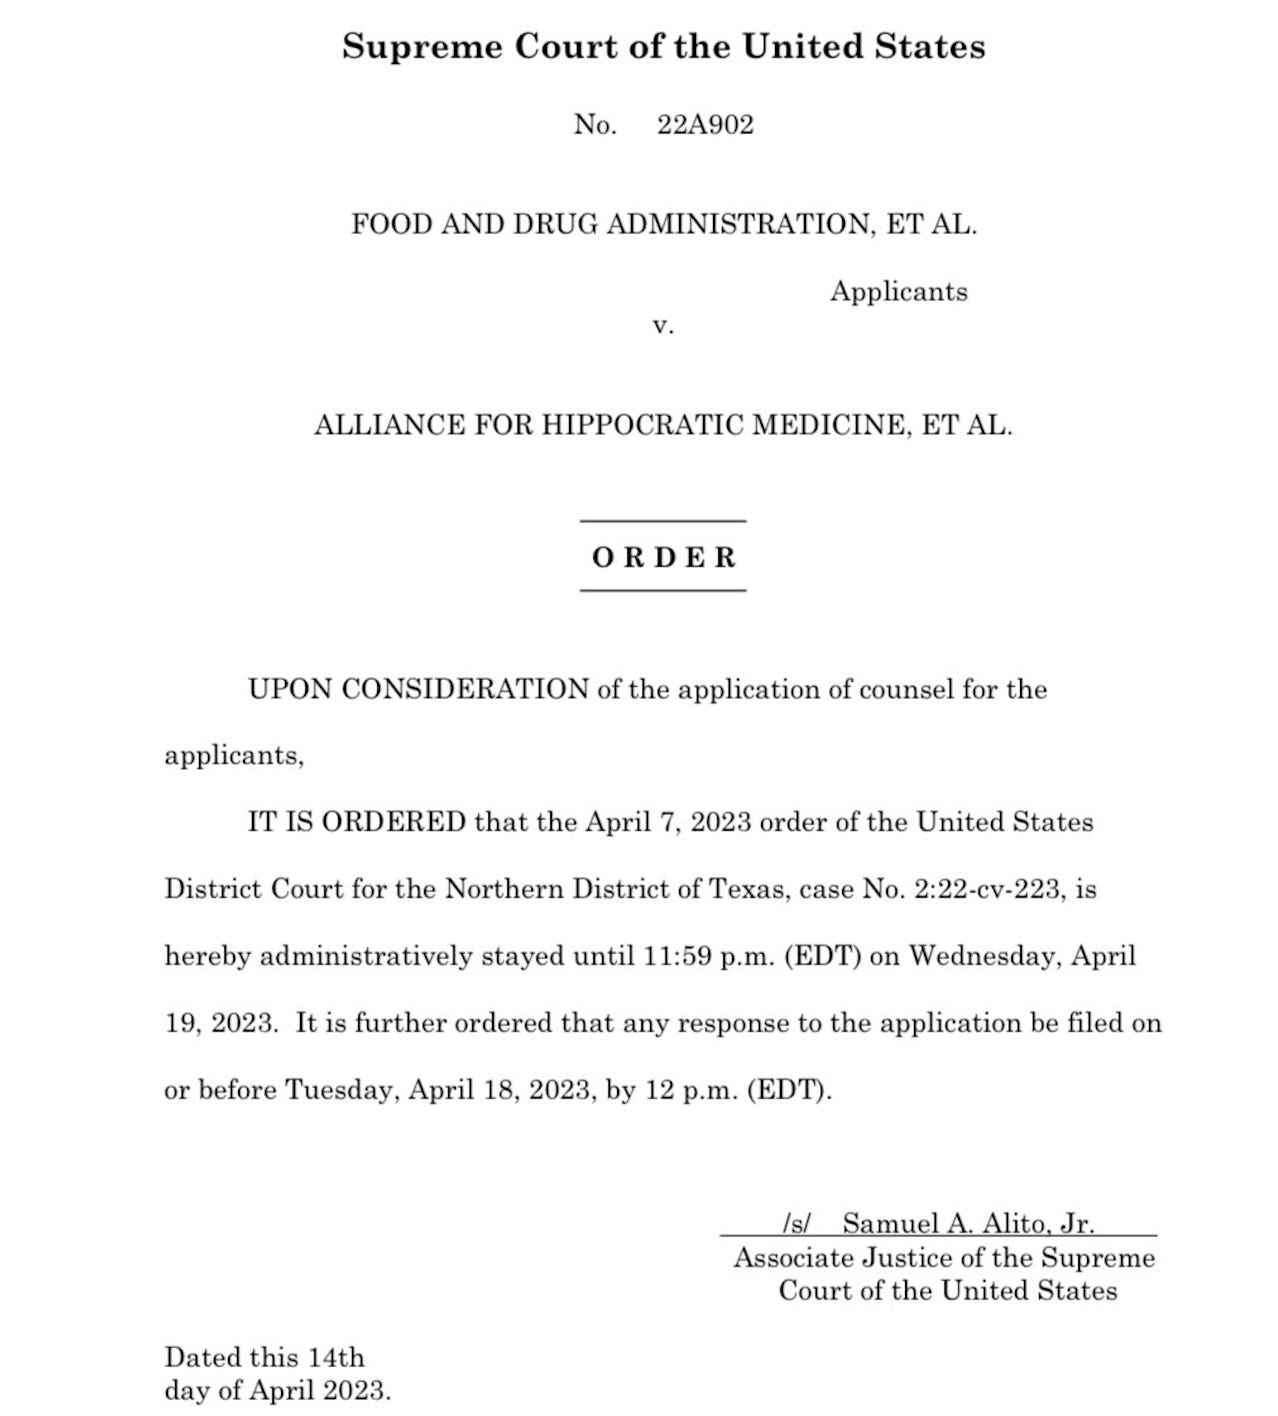 O R D E R  UPON CONSIDERATION of the application of counsel for the applicants, IT IS ORDERED that the April 7, 2023 order of the United States District Court for the Northern District of Texas, case No. 2:22-cv-223, is hereby administratively stayed until 11:59 p.m. (EDT) on Wednesday, April 19, 2023. It is further ordered that any response to the application be filed on or before Tuesday, April 18, 2023, by 12 p.m. (EDT).  /s/ Samuel A. Alito, Jr. Associate Justice of the Supreme Court of the United States